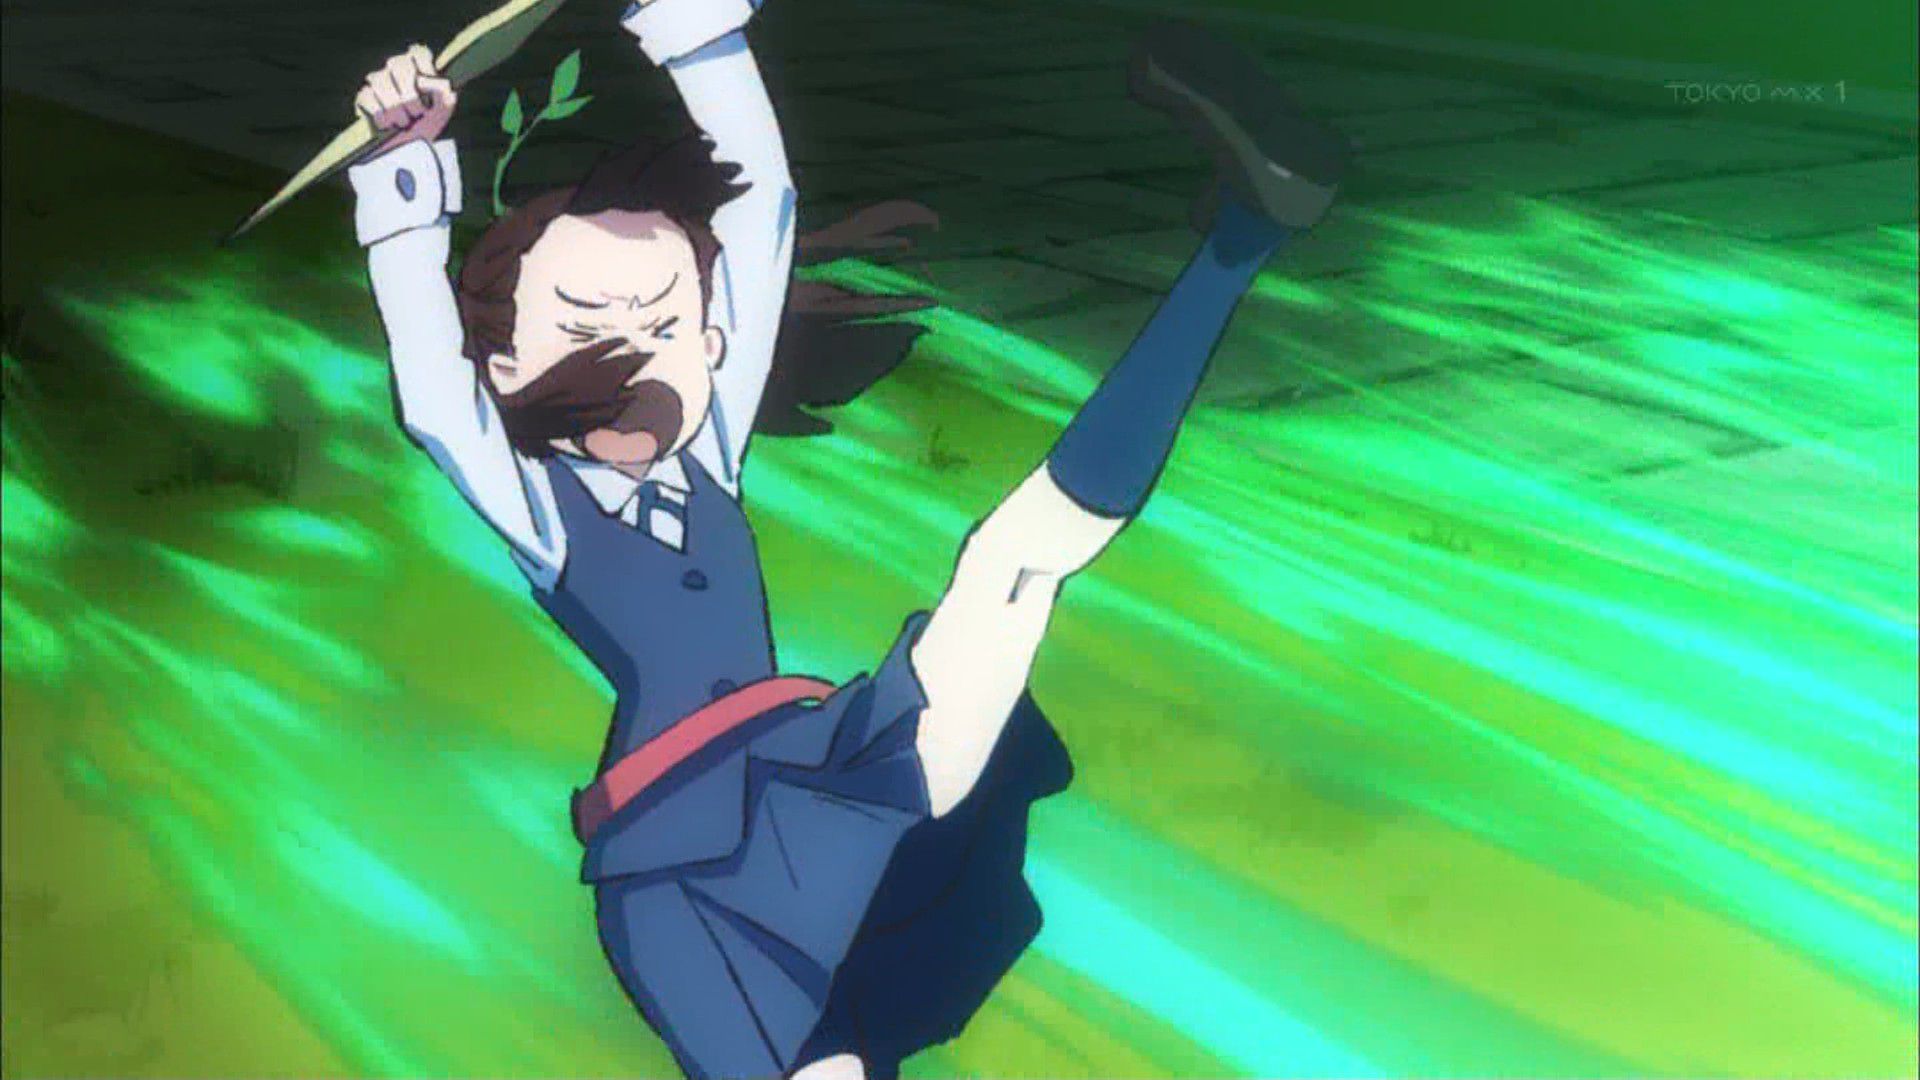 And want to show "little witch academia's story, children cartoons! 16